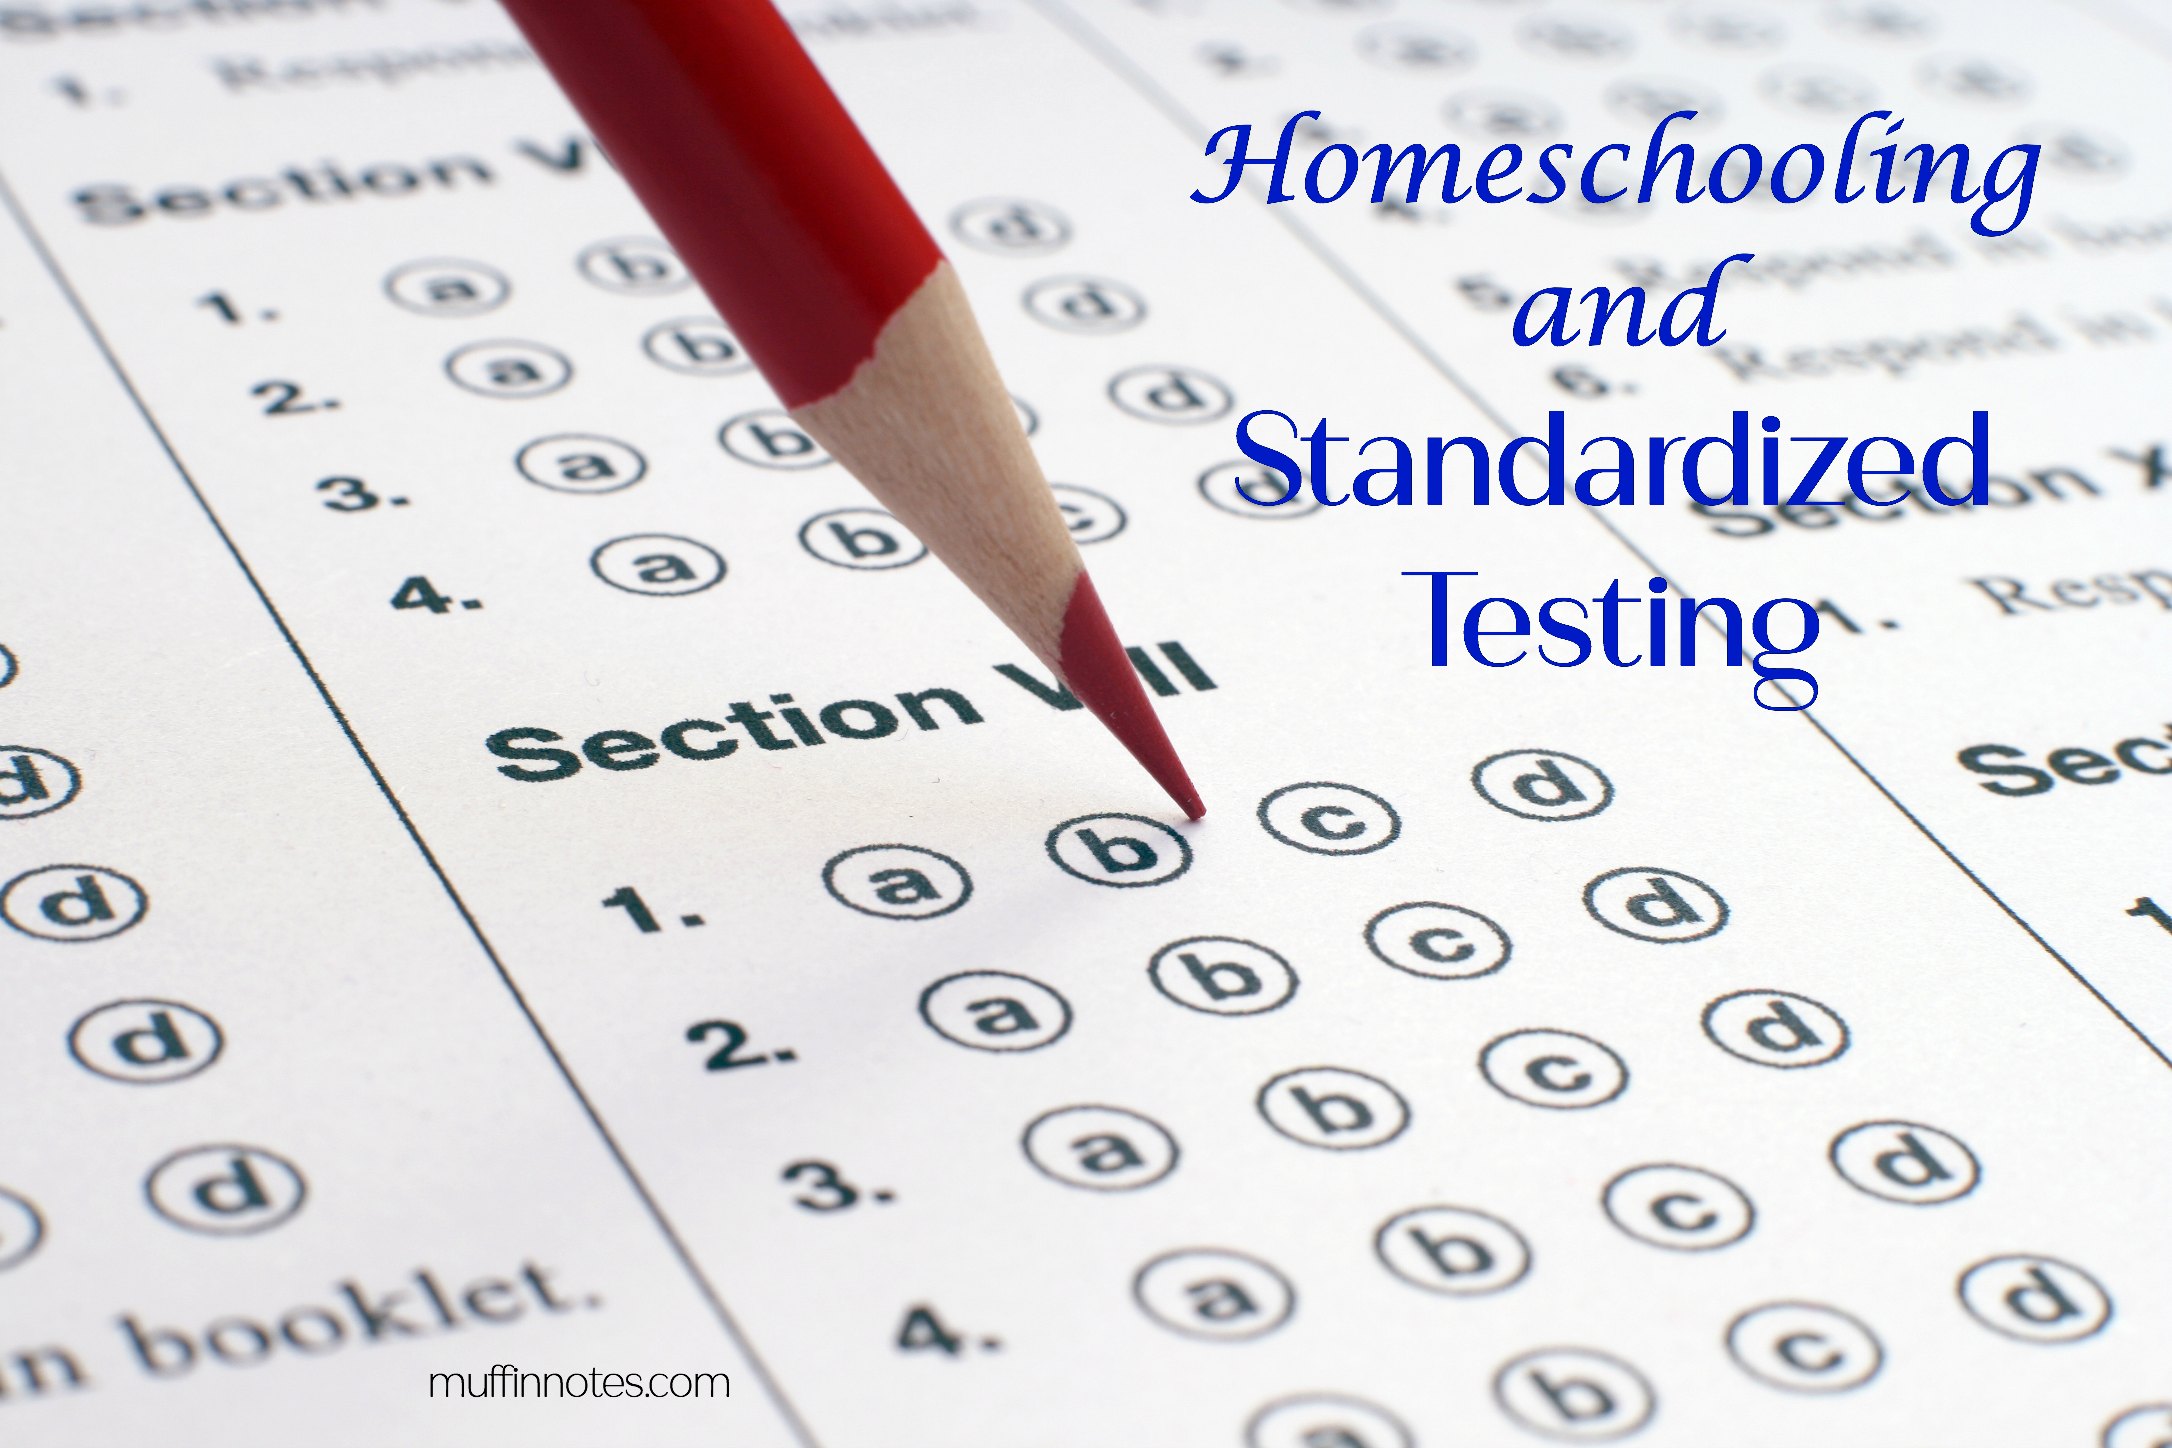 Homeschooling and standardized testing